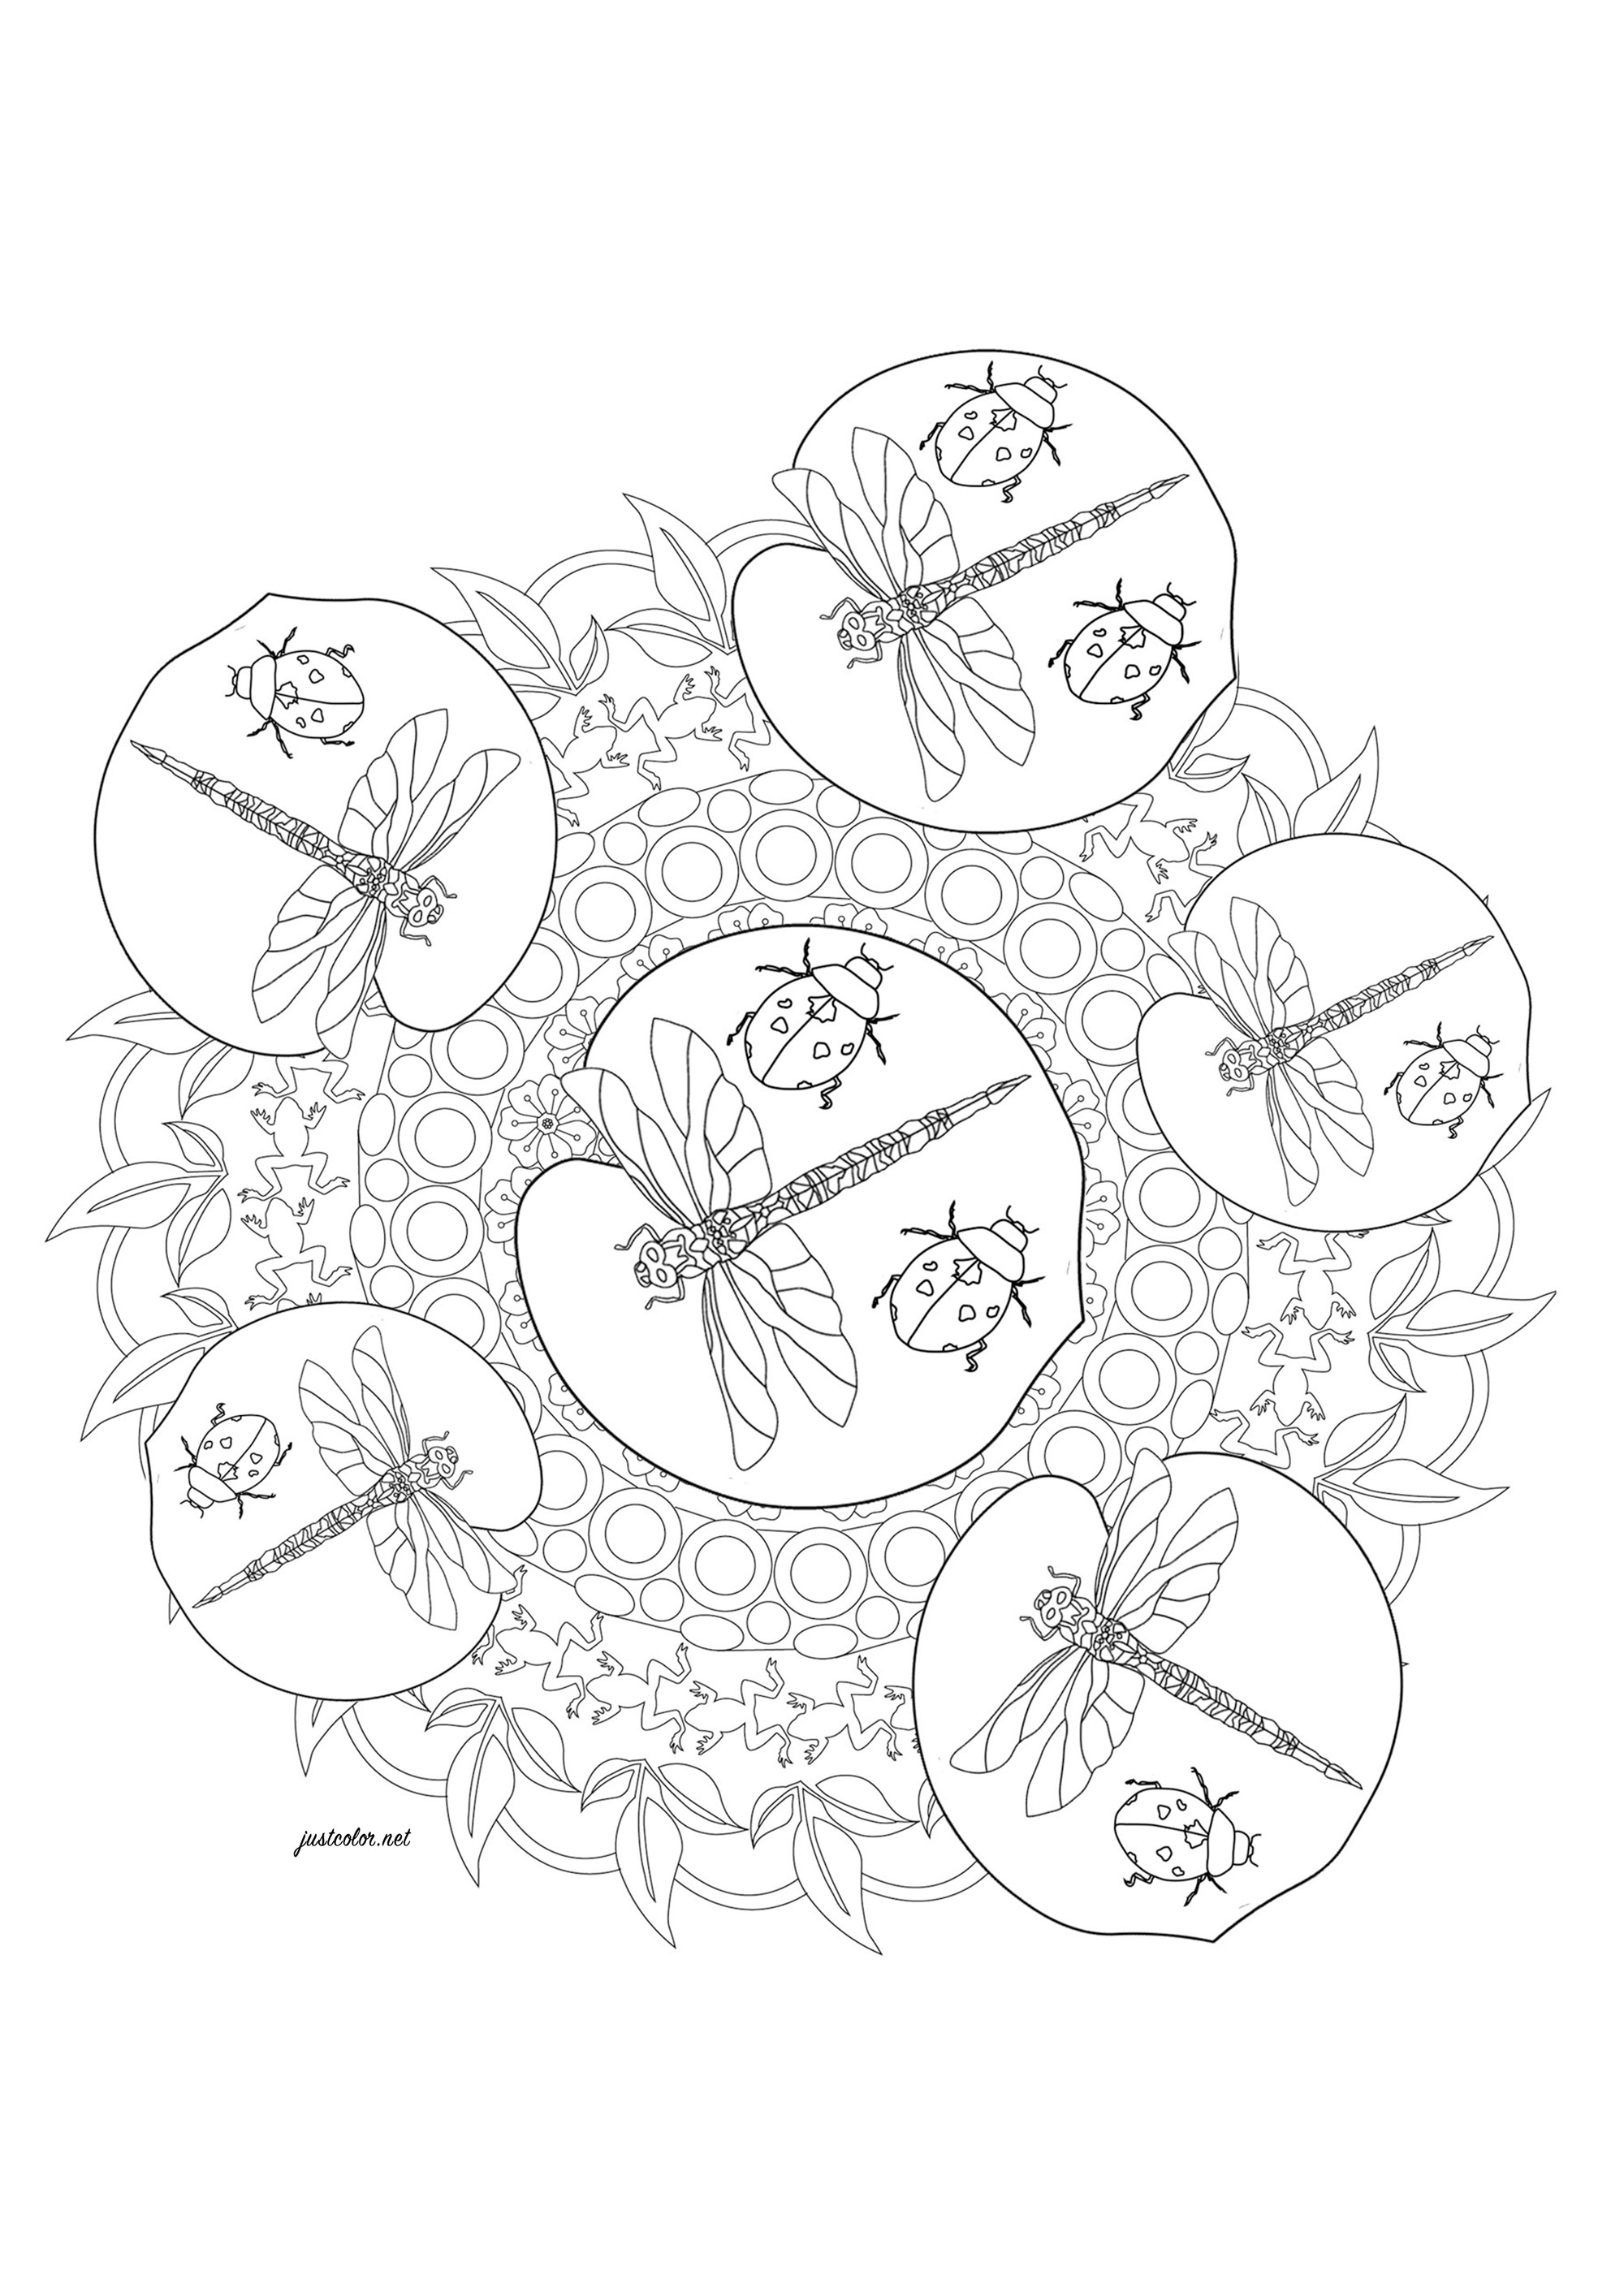 Ladybug and dragonflies in front of a beautiful Mandala